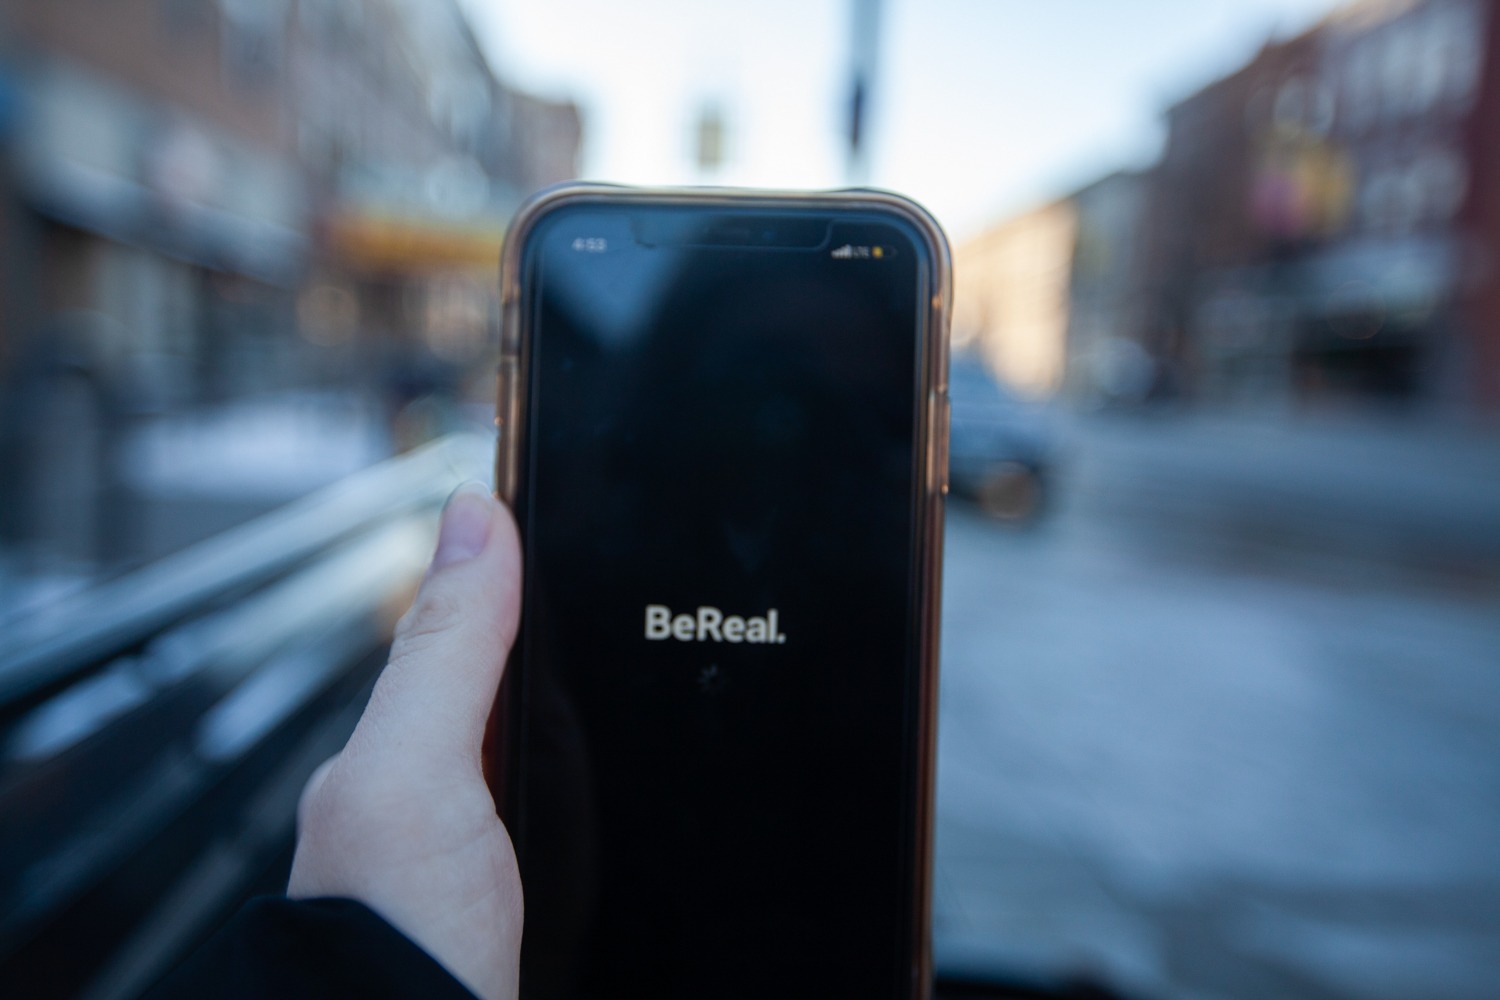 In this article, we covered what is BeReal, and how to use it. We also went over how to post on BeReal and all the factors that make this a hit among Gen Z audiences.